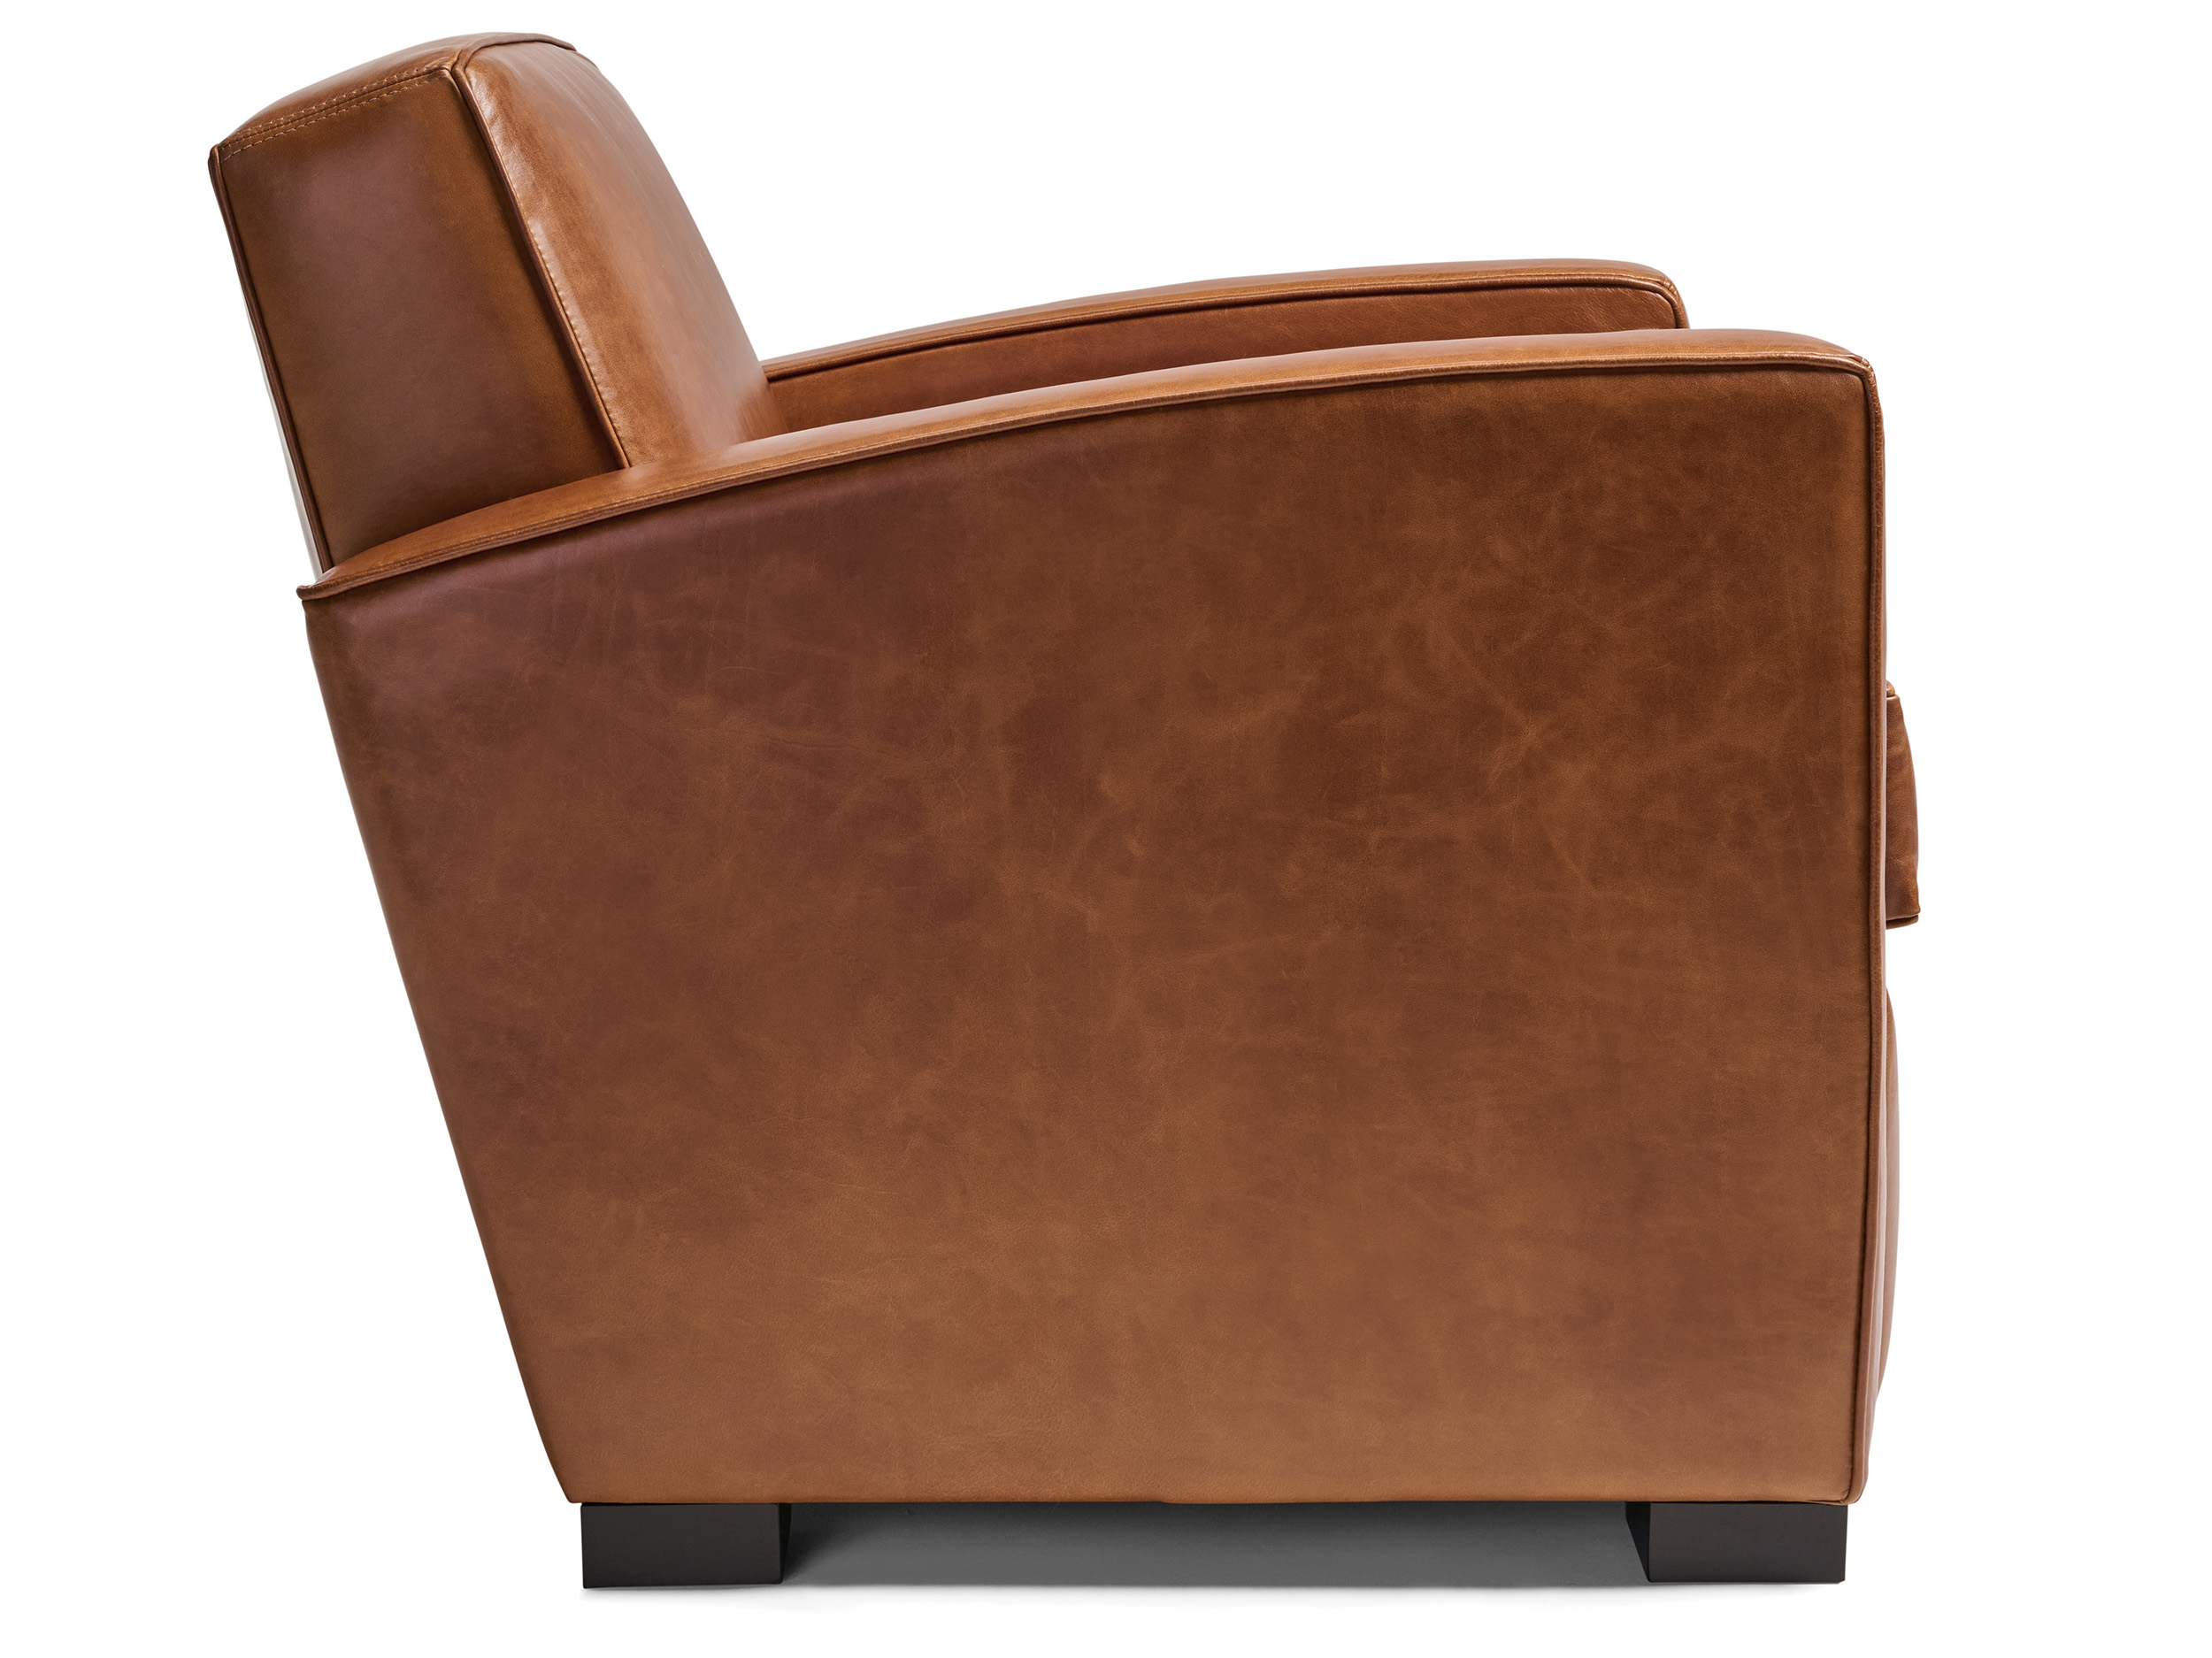 In stock - Atlas Leather Chair in Mont Blanc Caramel Leather - One only - side